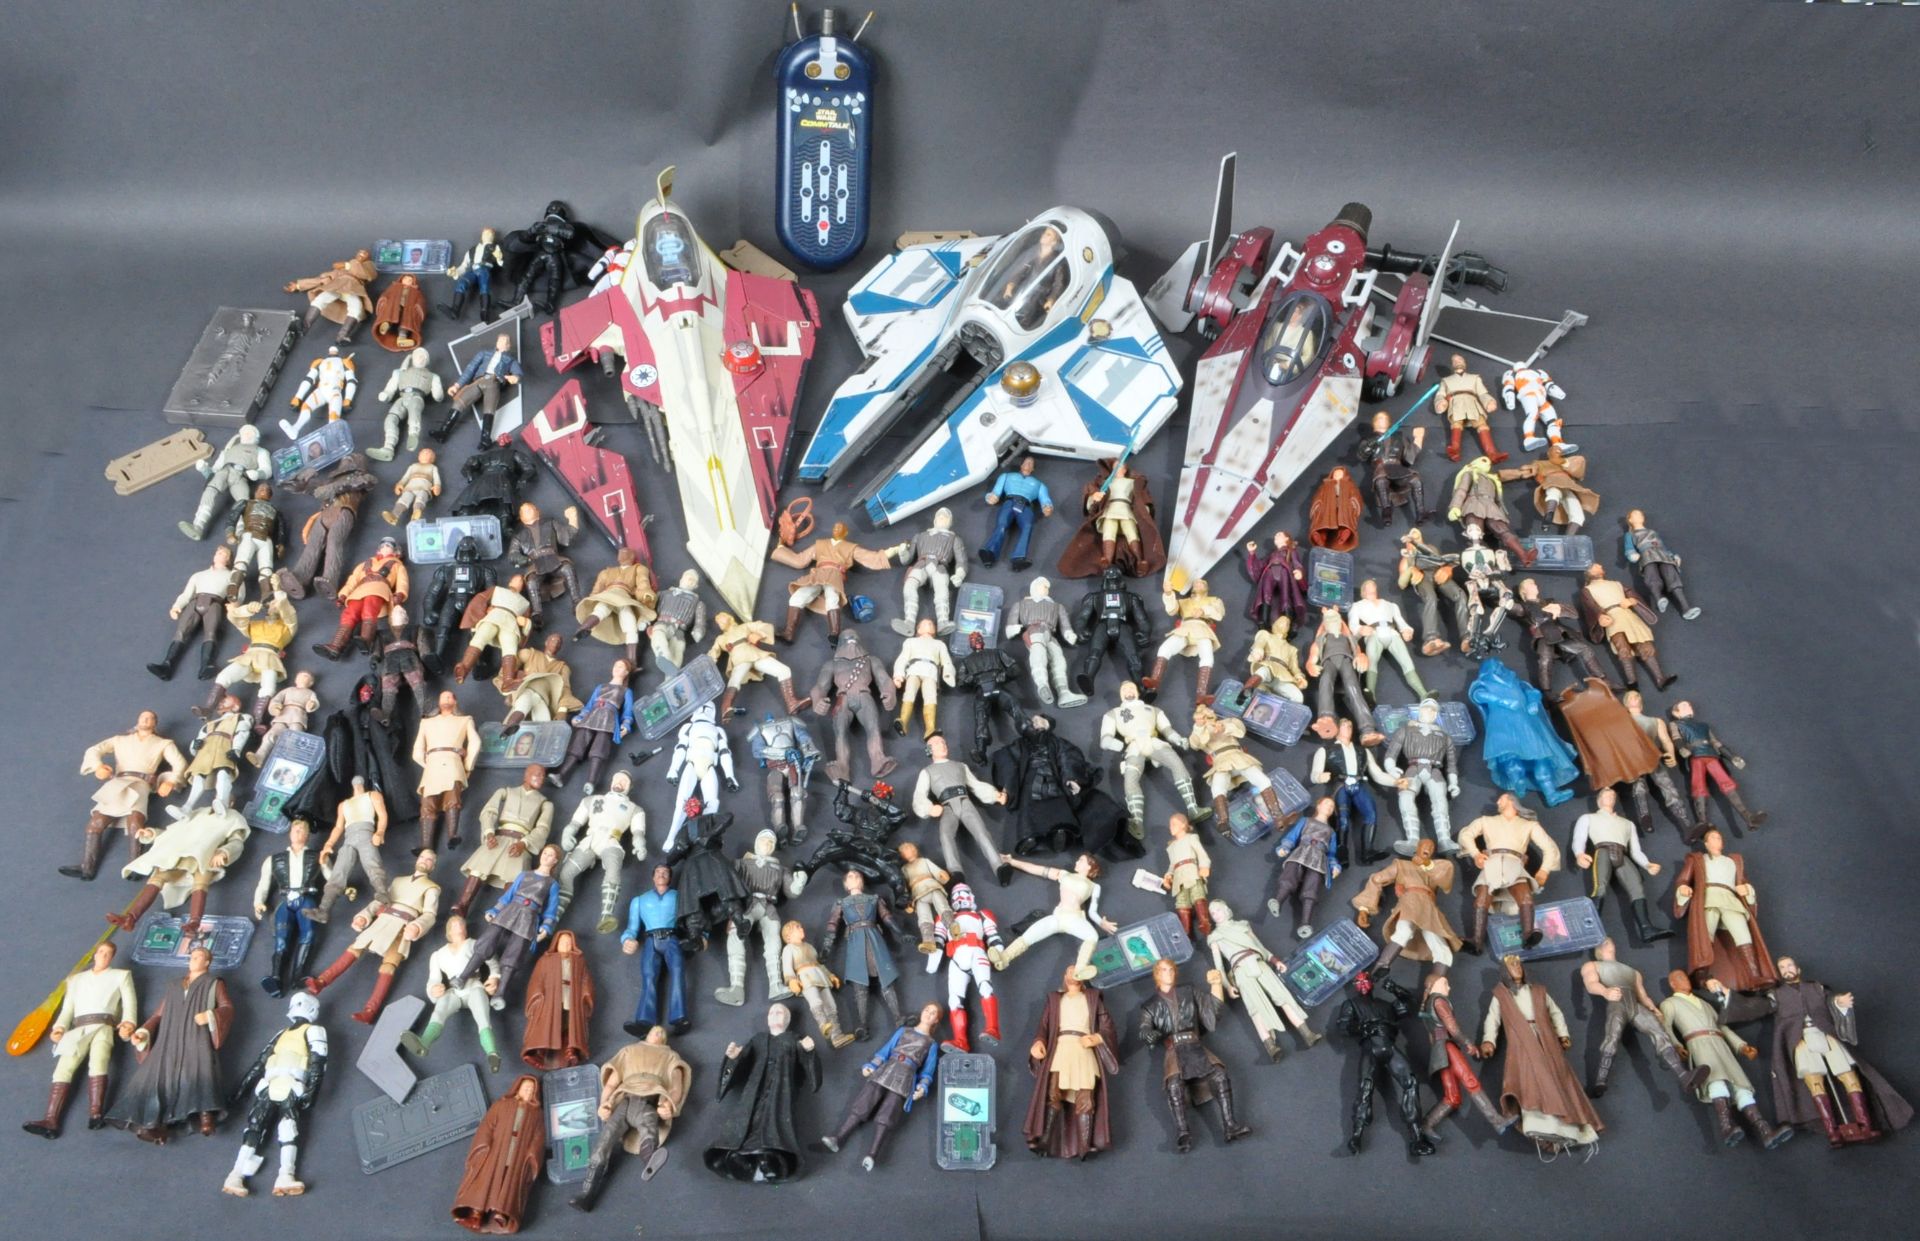 STAR WARS - LARGE COLLECTION KENNER / HASBRO CLONE WARS & OTHER FIGURES